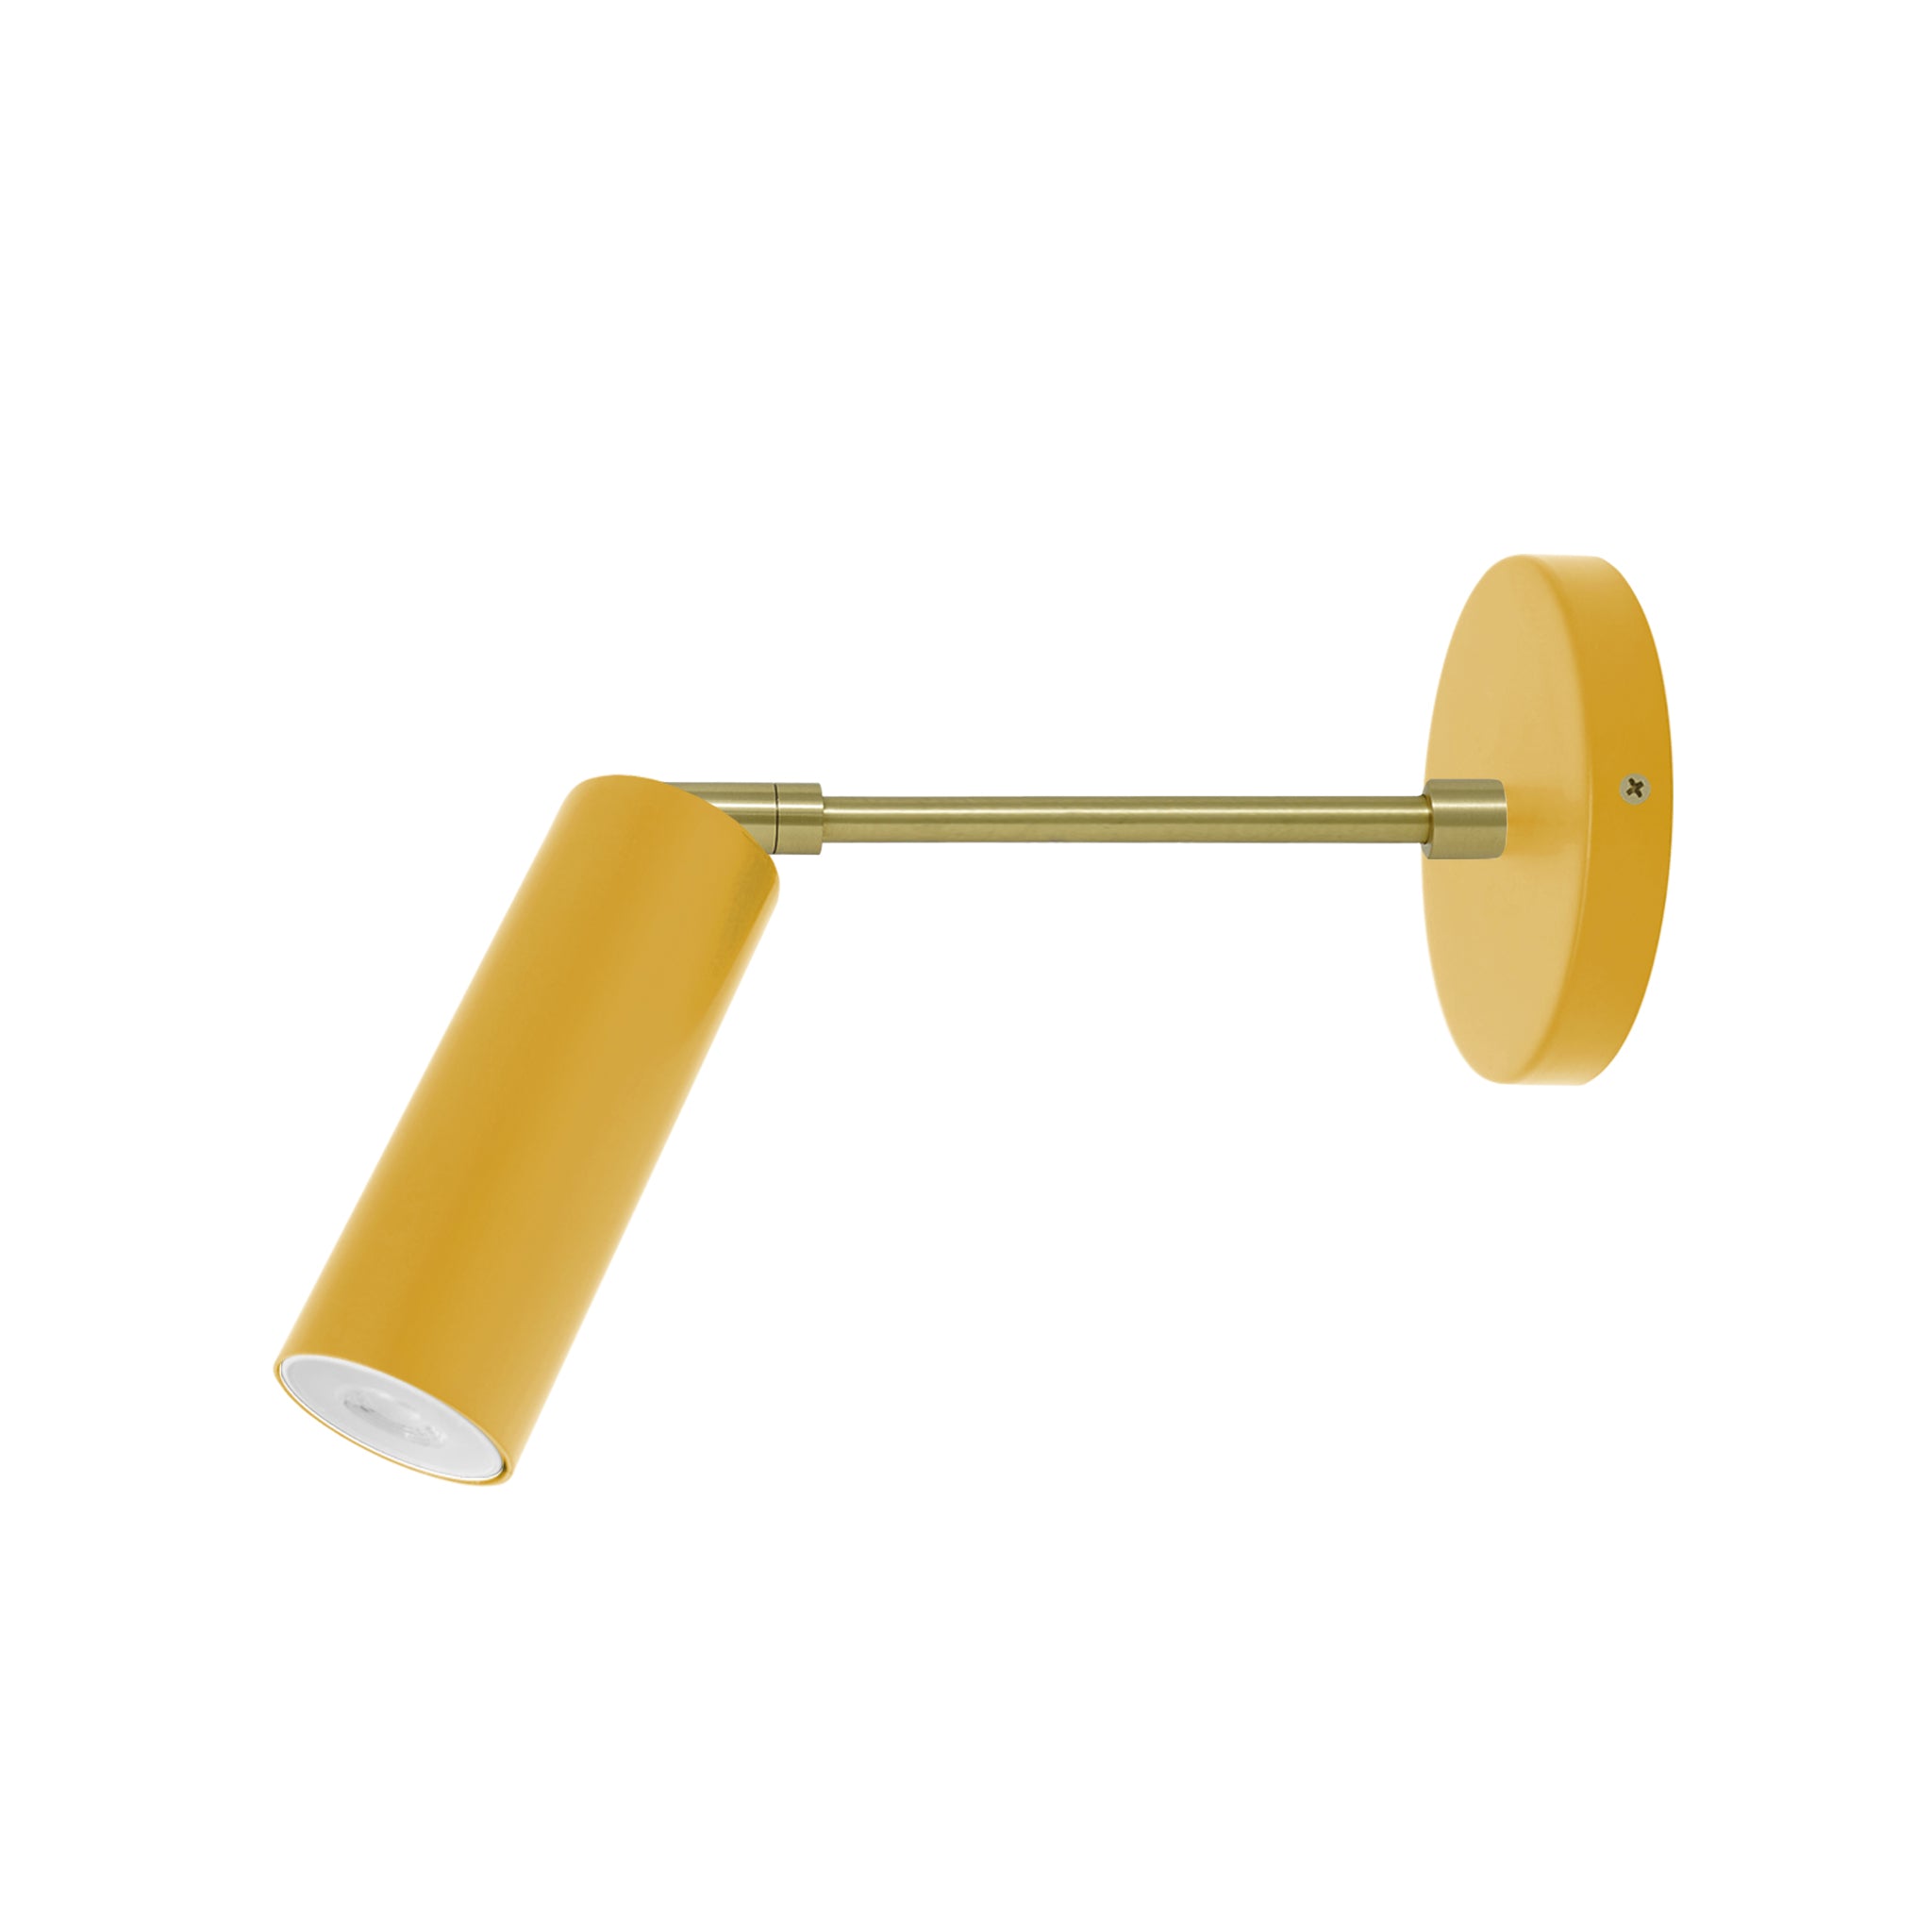 Brass and ochre color Reader sconce 6" arm Dutton Brown lighting